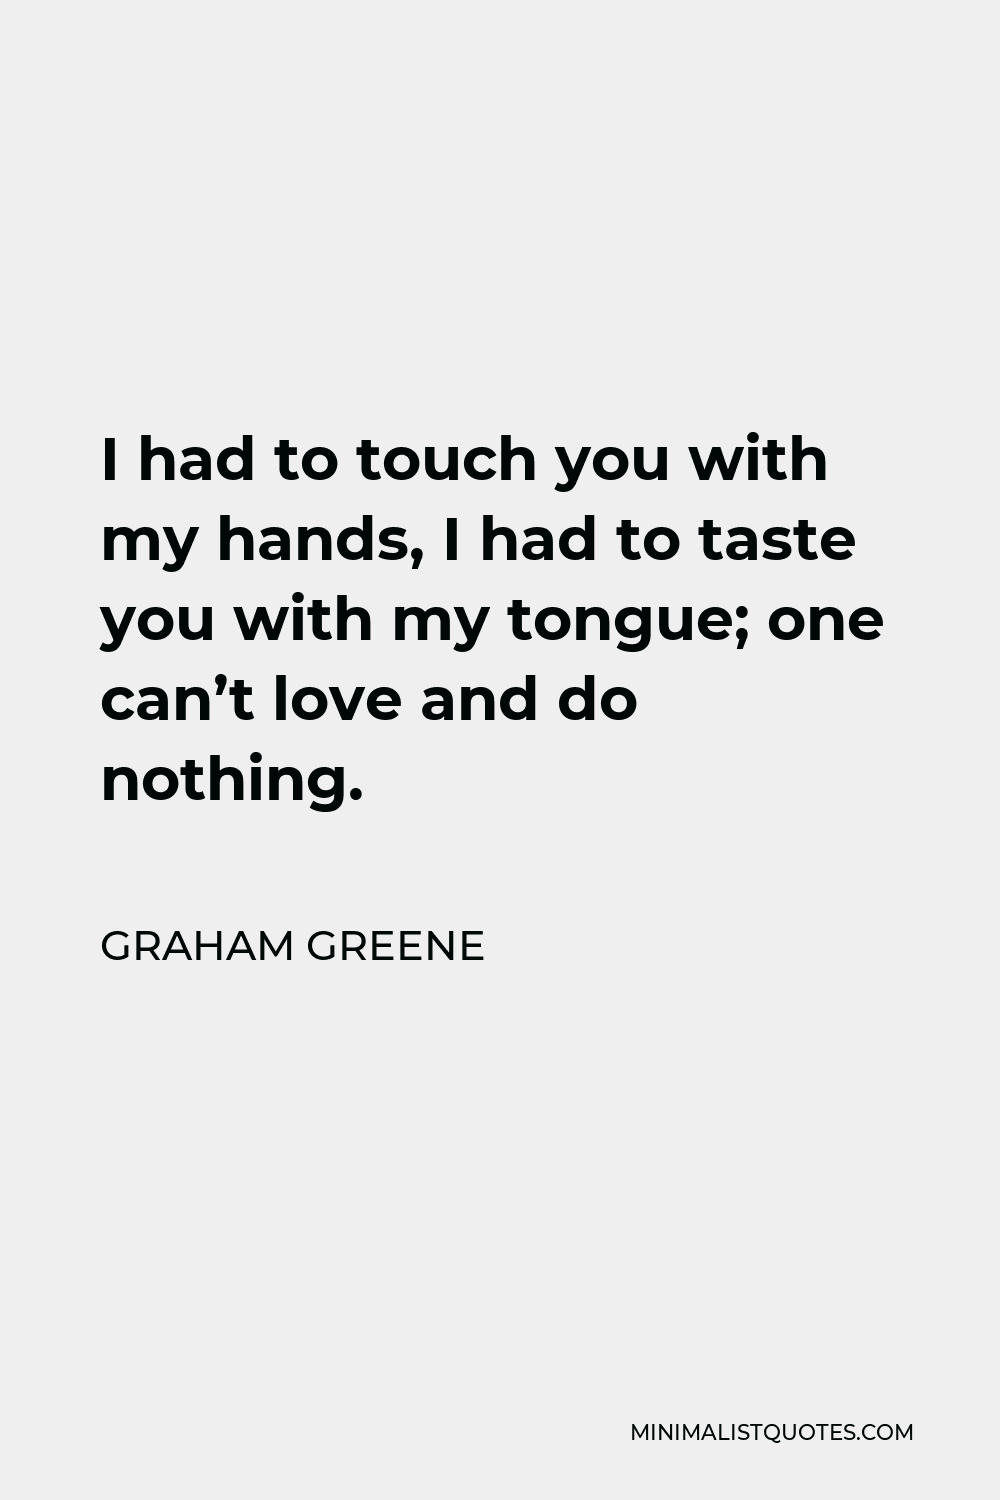 Graham Greene Quote - I had to touch you with my hands, I had to taste you with my tongue; one can’t love and do nothing.